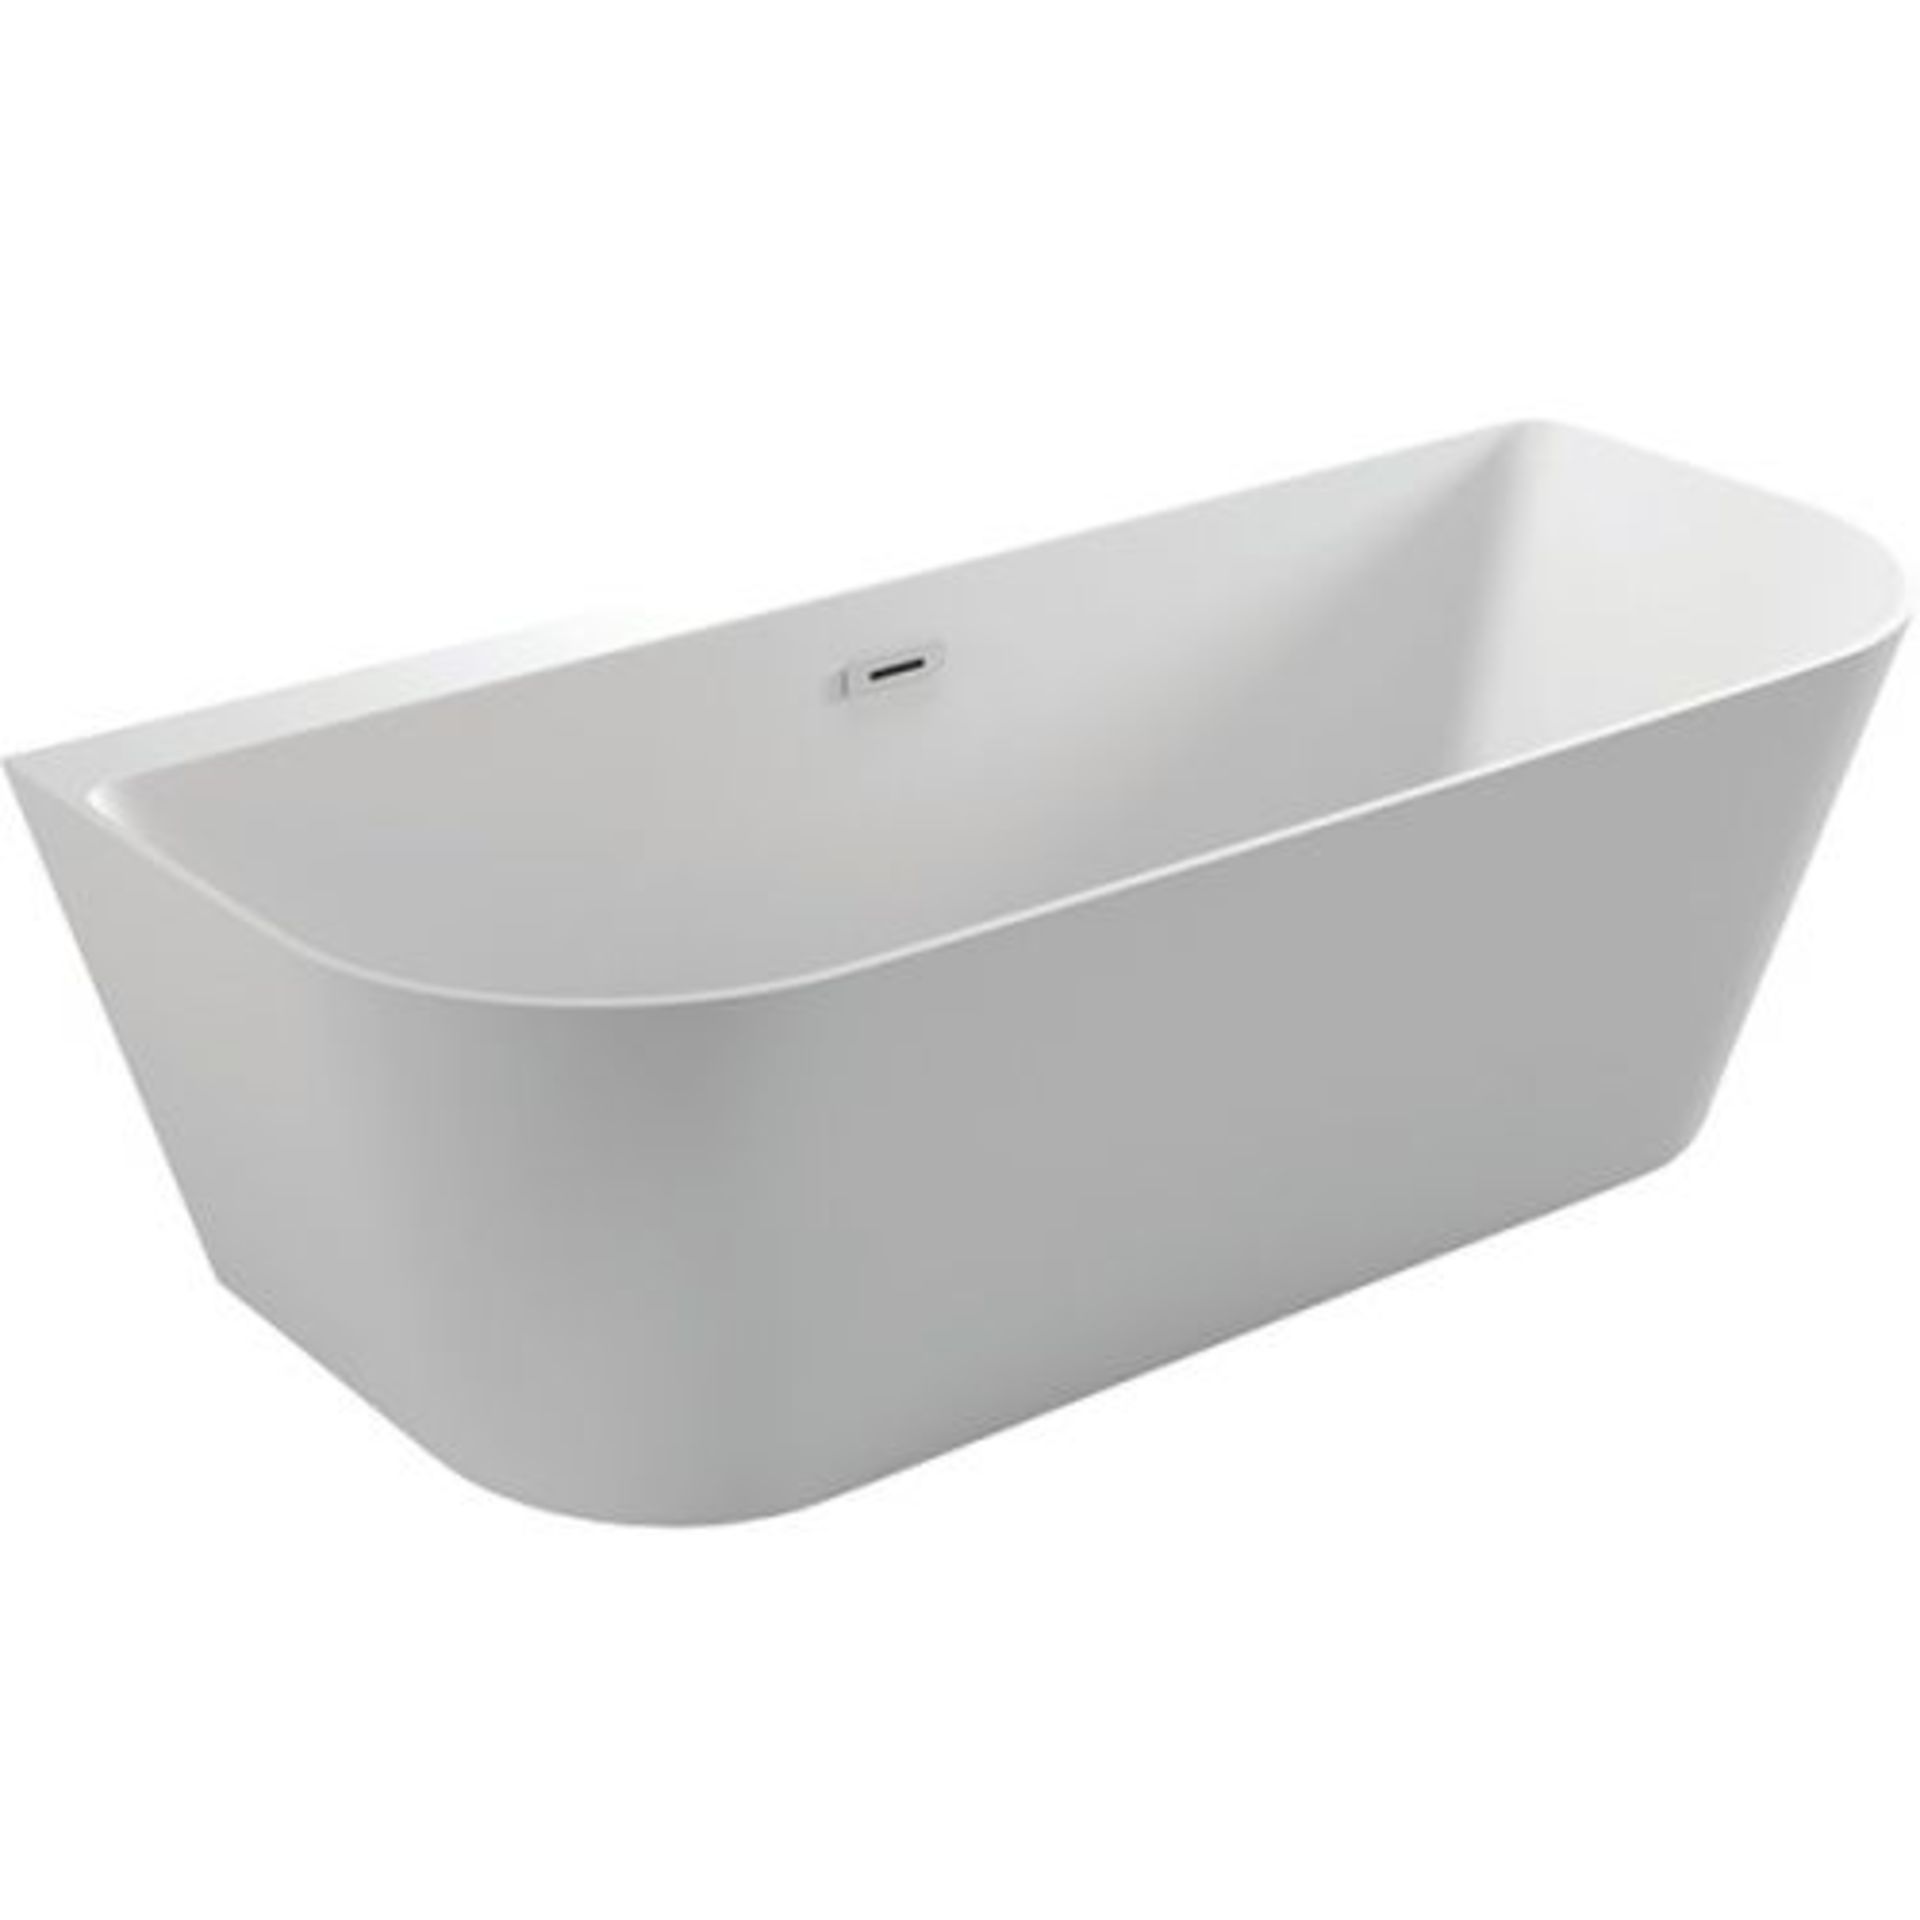 New (Y4) 1500x750mm Modern Freestanding D Shape Bath. RRP £1,401.99. White Acrylic Finish Sup... - Image 2 of 2